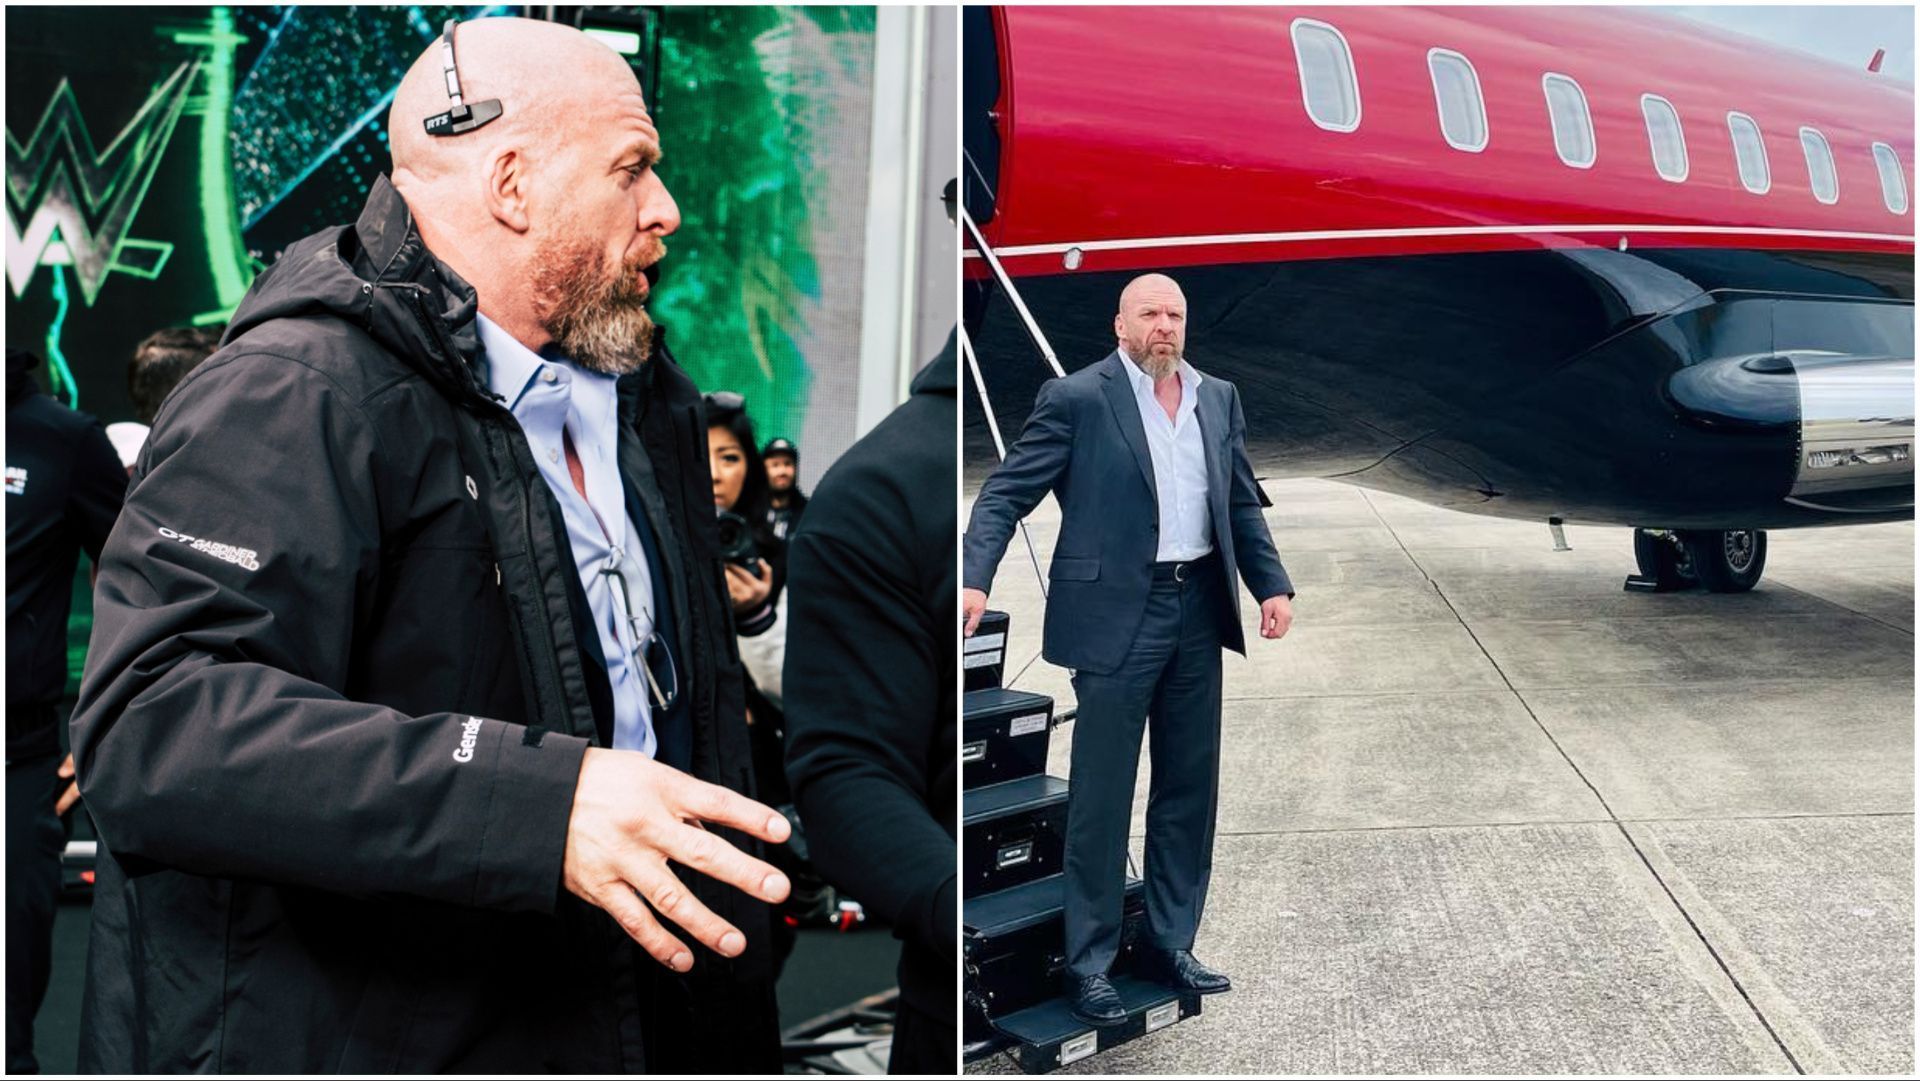 Triple H at WrestleMania XL, Triple H steps off the WWE jet